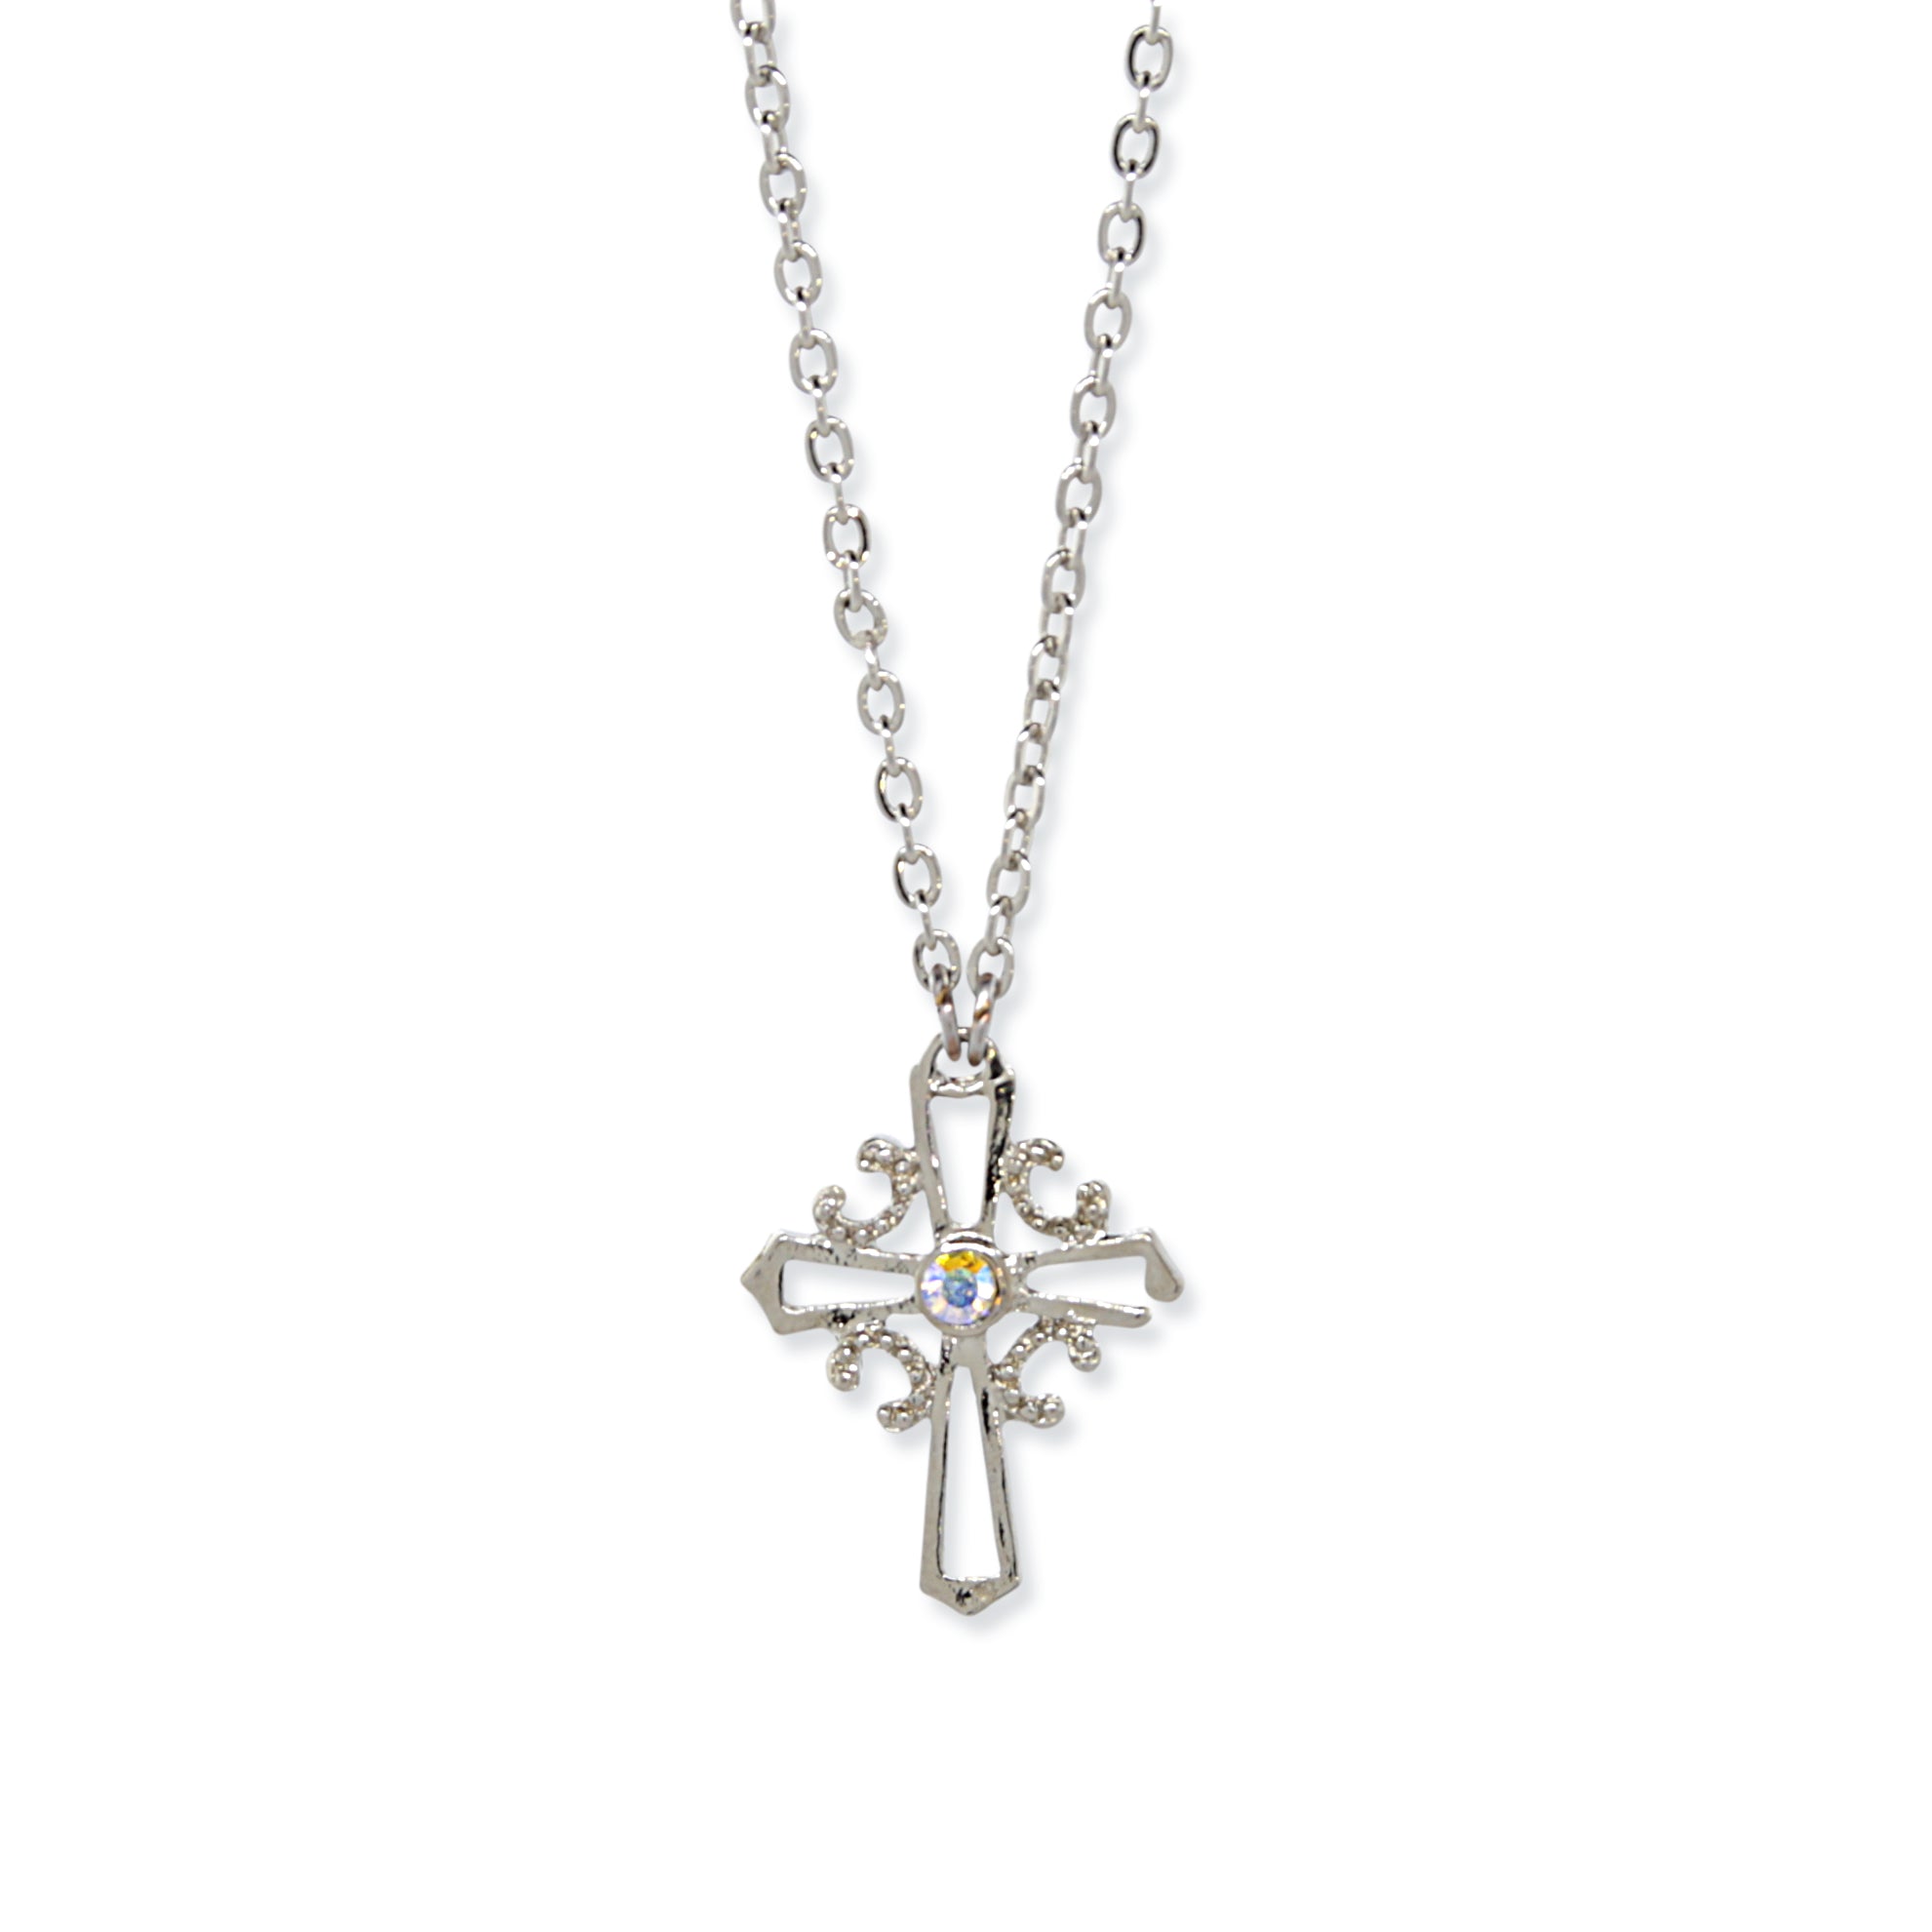 Large Cross Pendent Necklace, AB, Clear, Black or Pink Gems